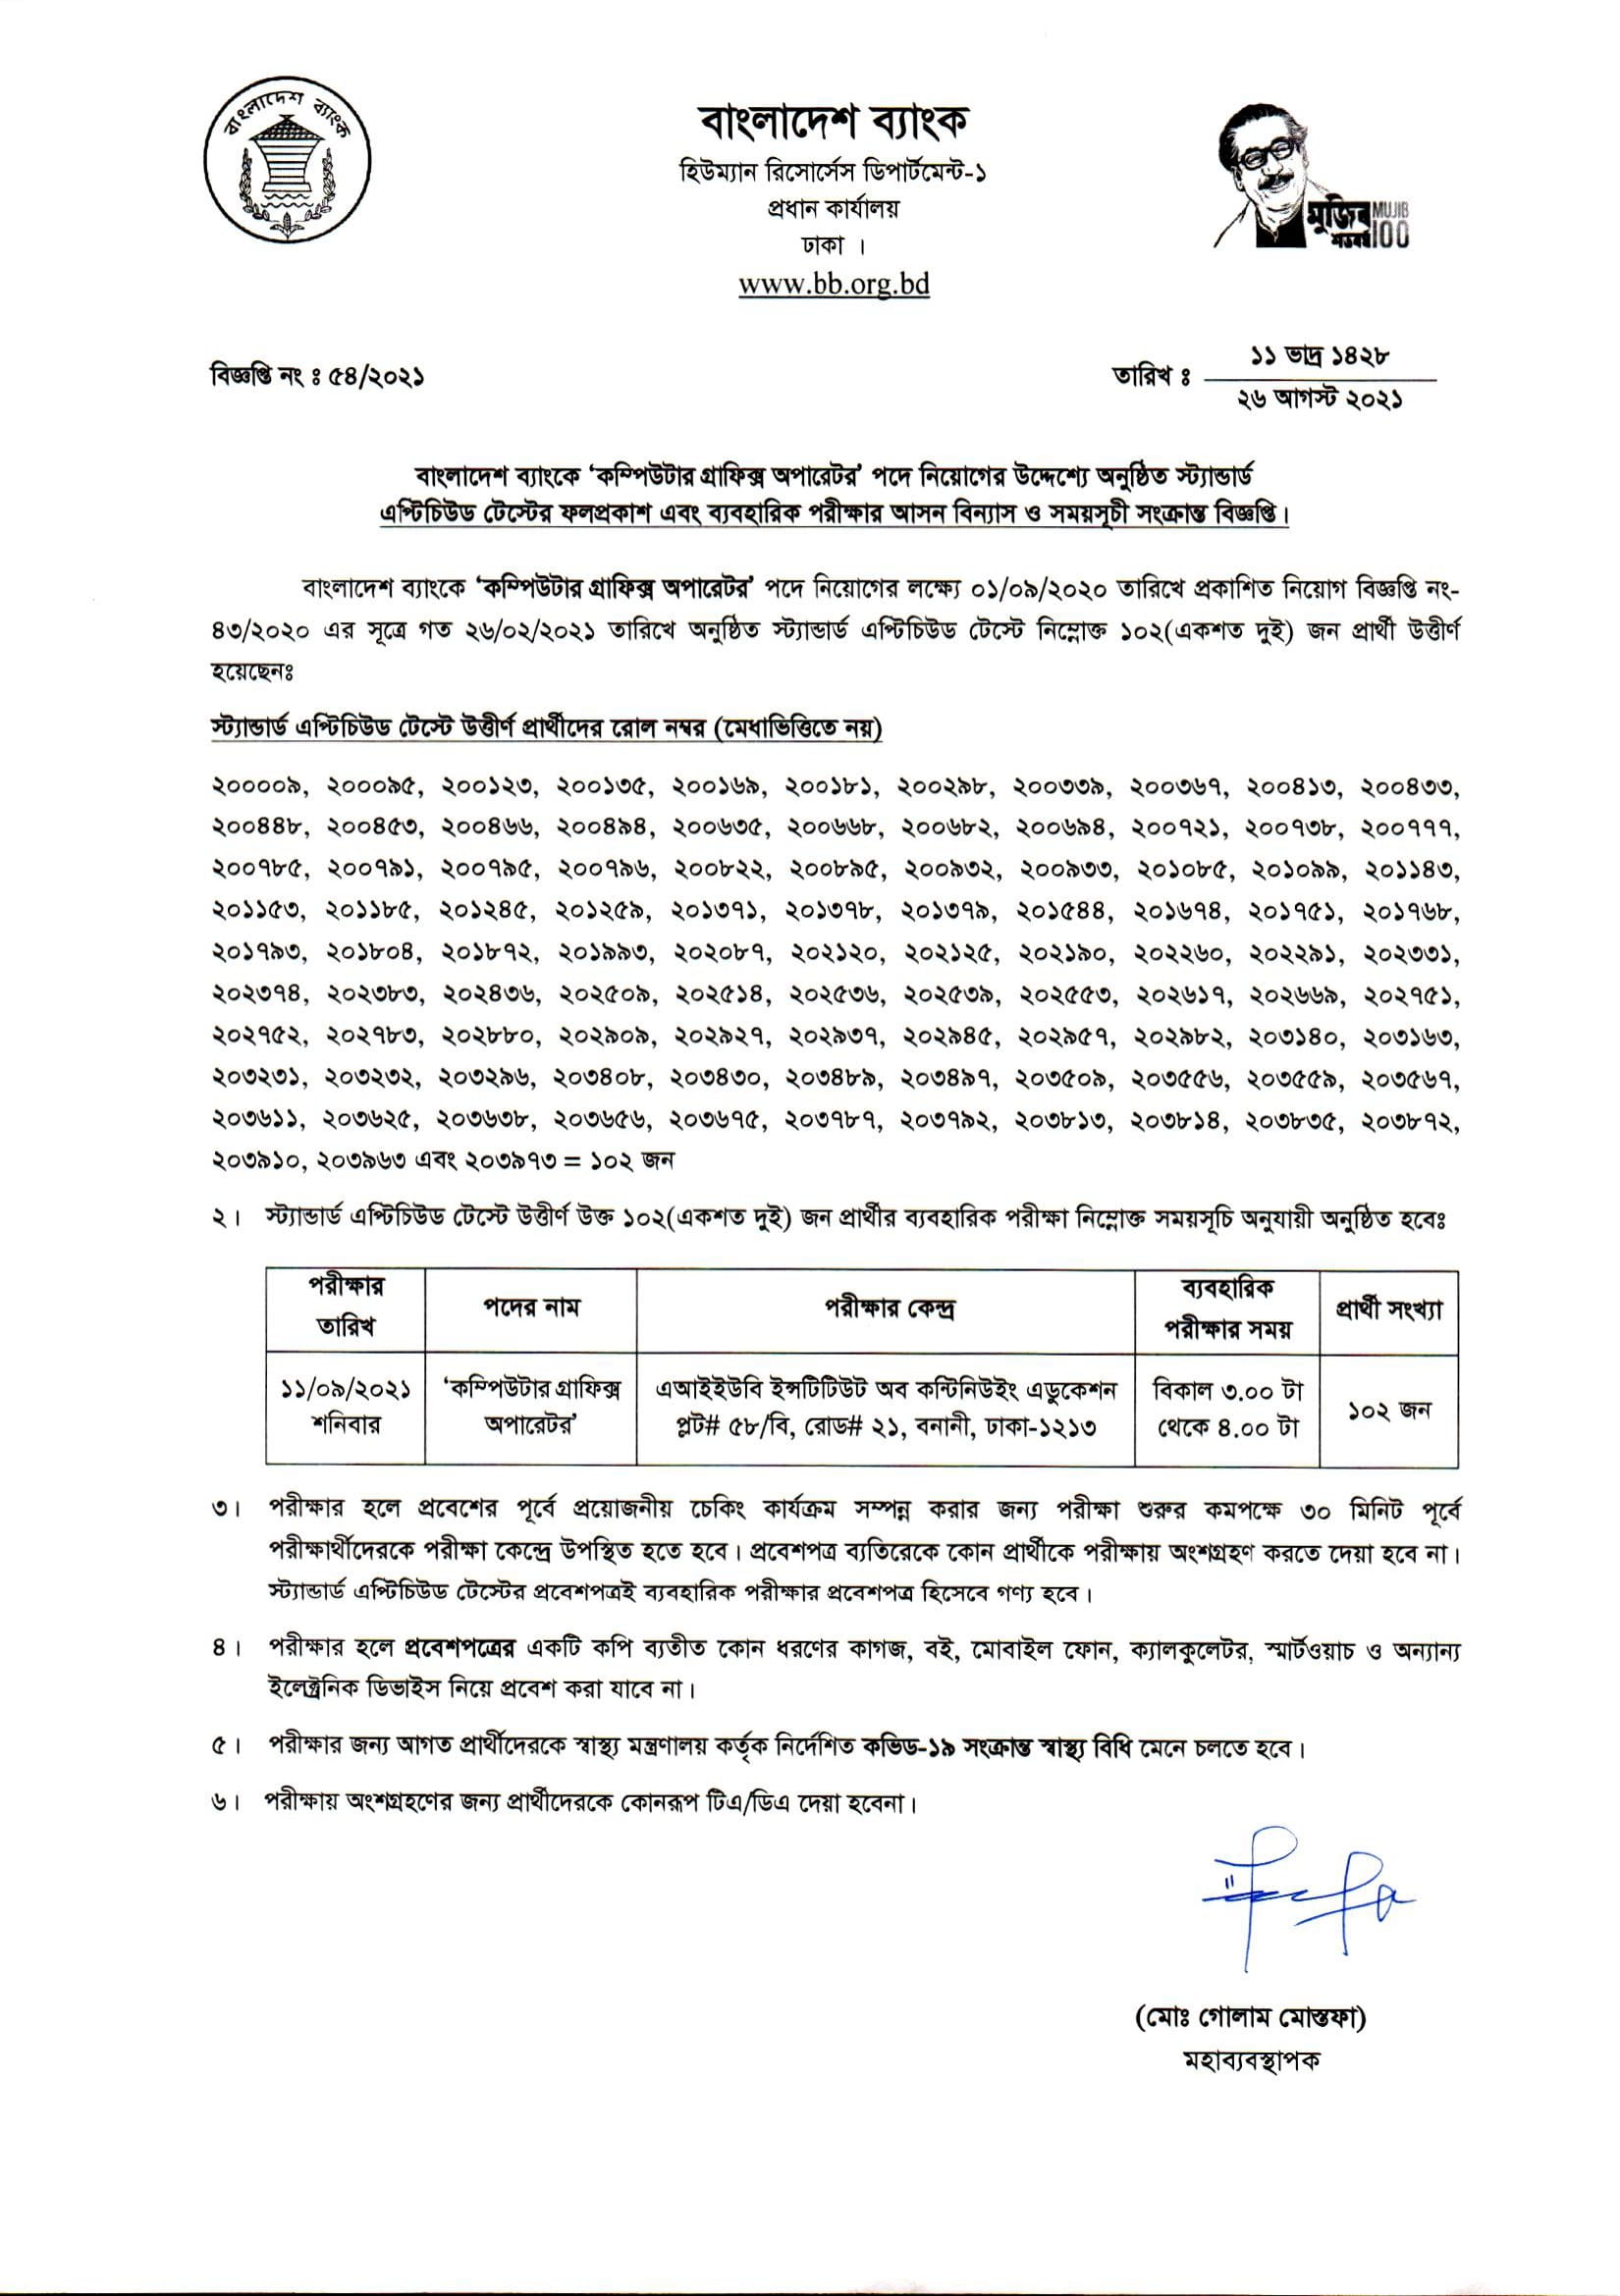 Bangladesh Bank Computer Graphics Operator Aptitude Test Result And Practical Test Date 2021 PDF